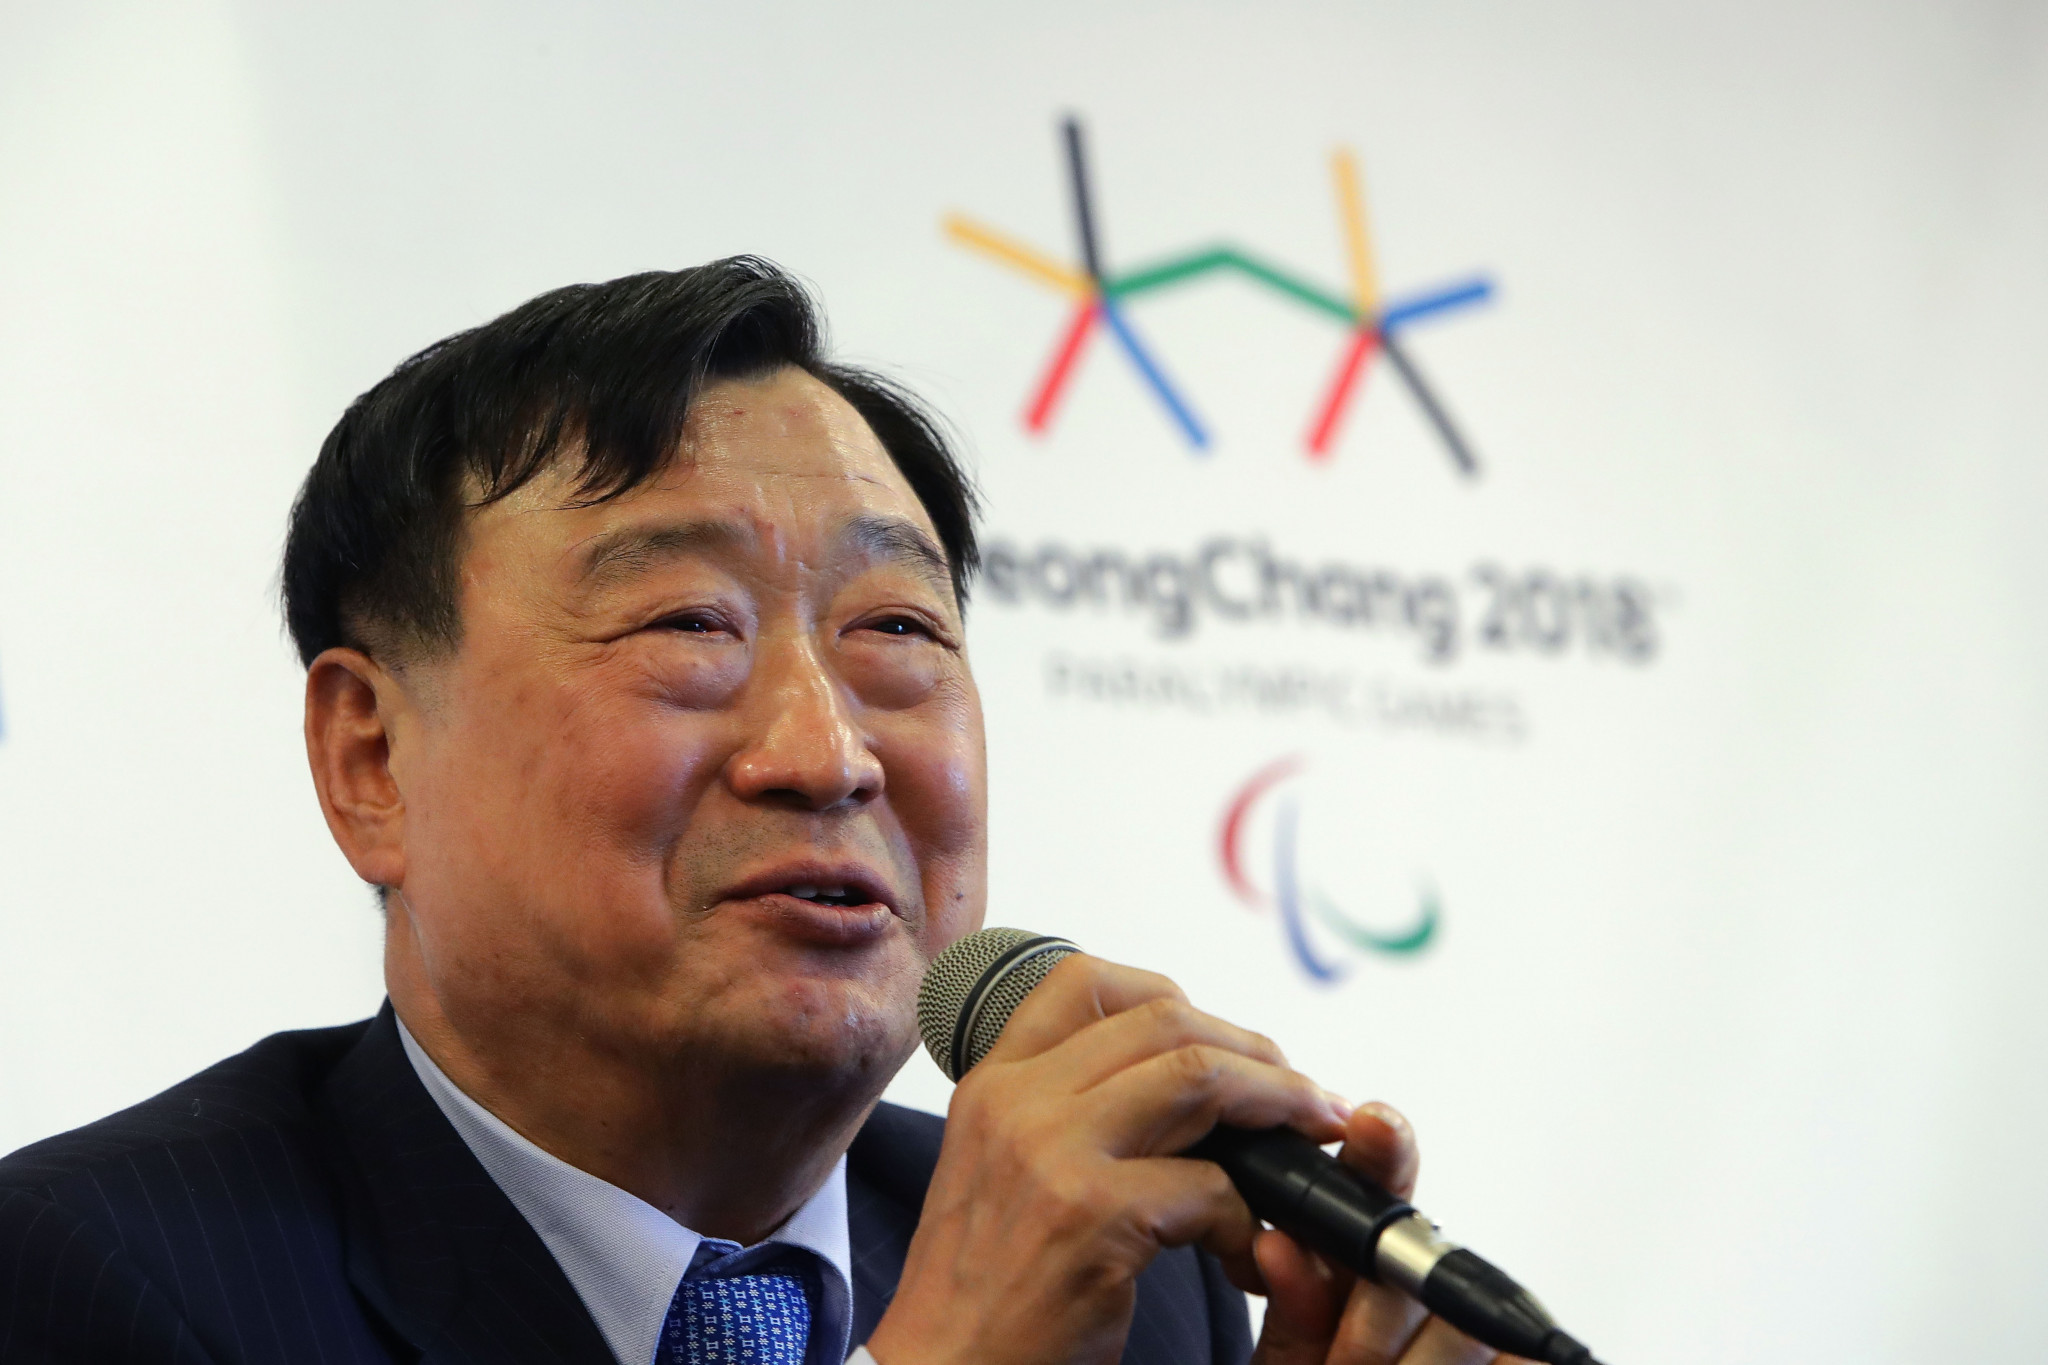 Pyeongchang 2018 President downplays concerns and calls for Russian and North Korean participation